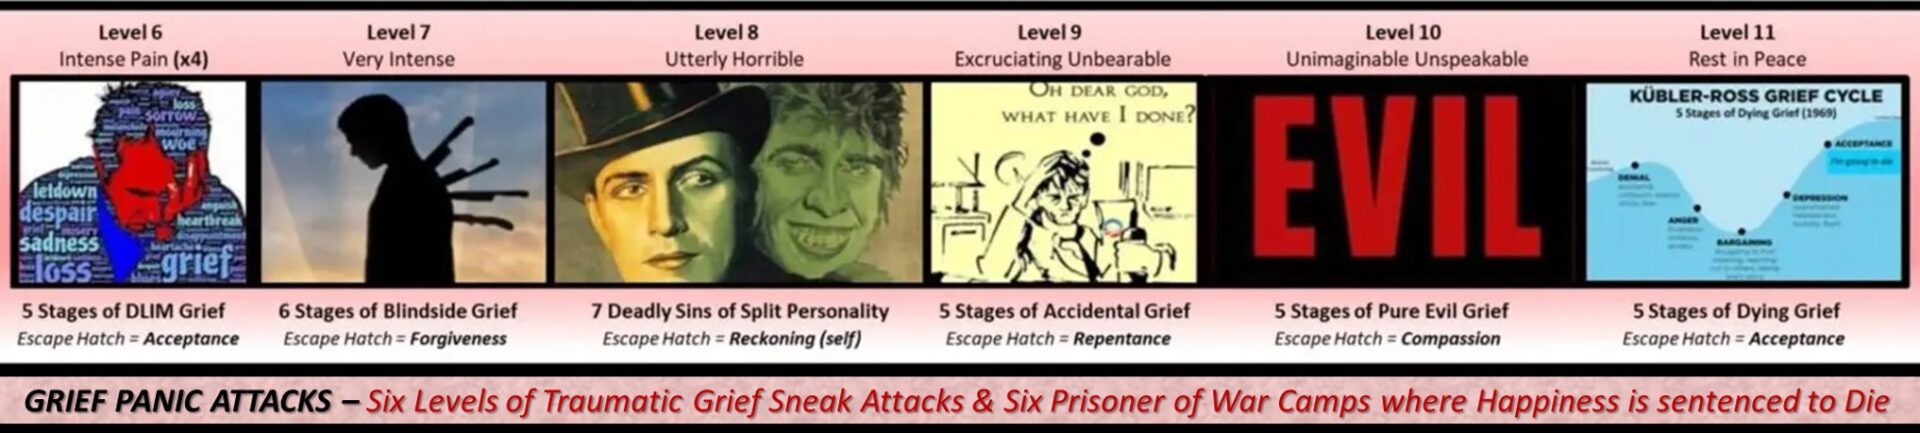 Six Levels of Grief Panic Attacks & Six Prisoner of War Camps - Happiness Death Sentence